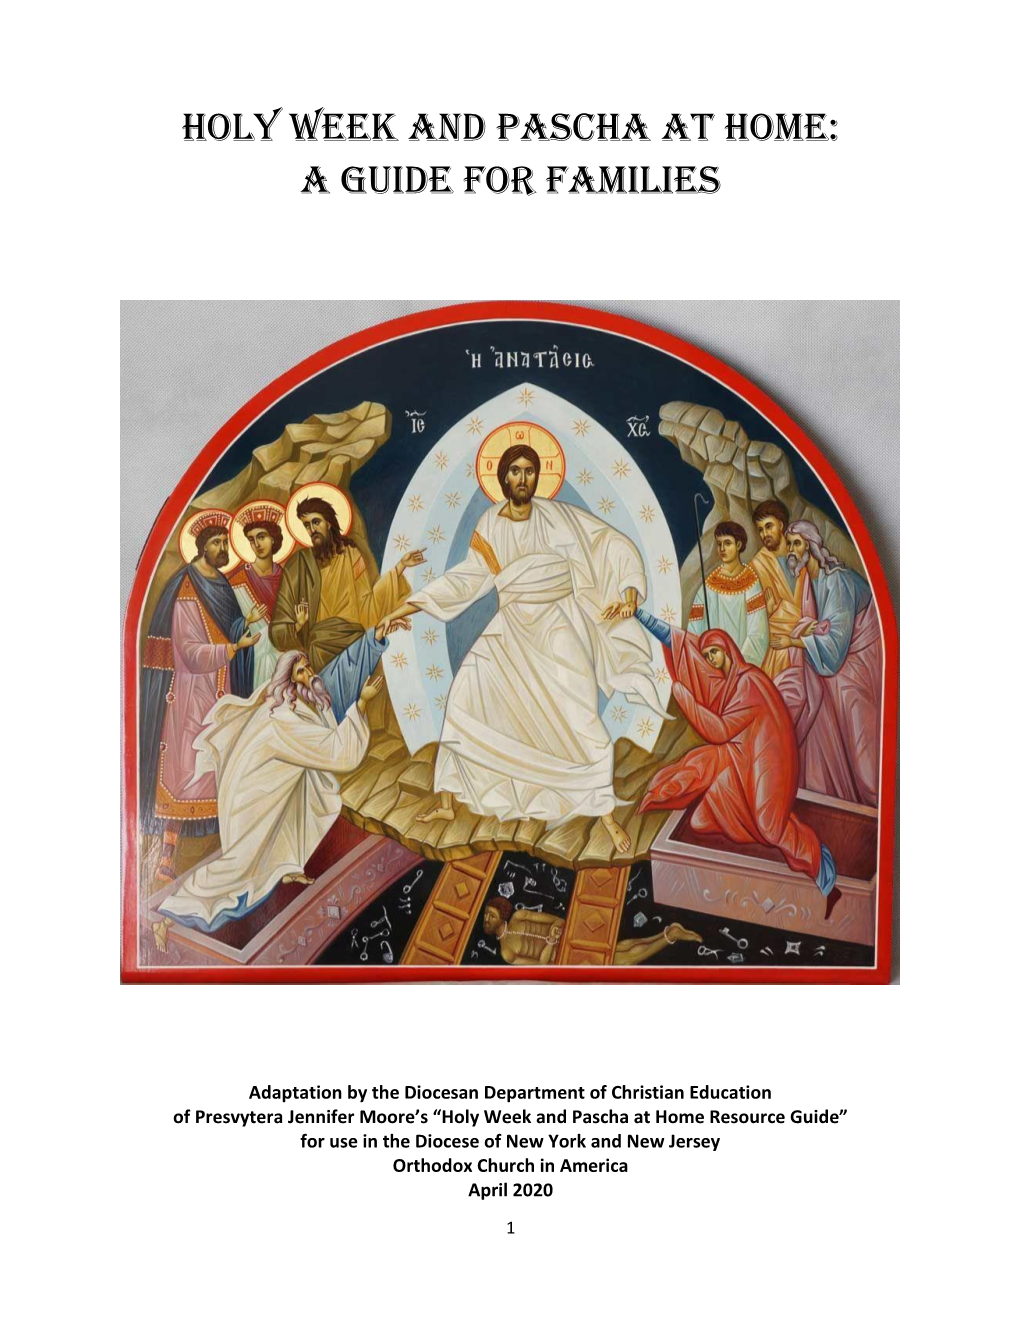 Holy Week and Pascha at Home: a Guide for Families